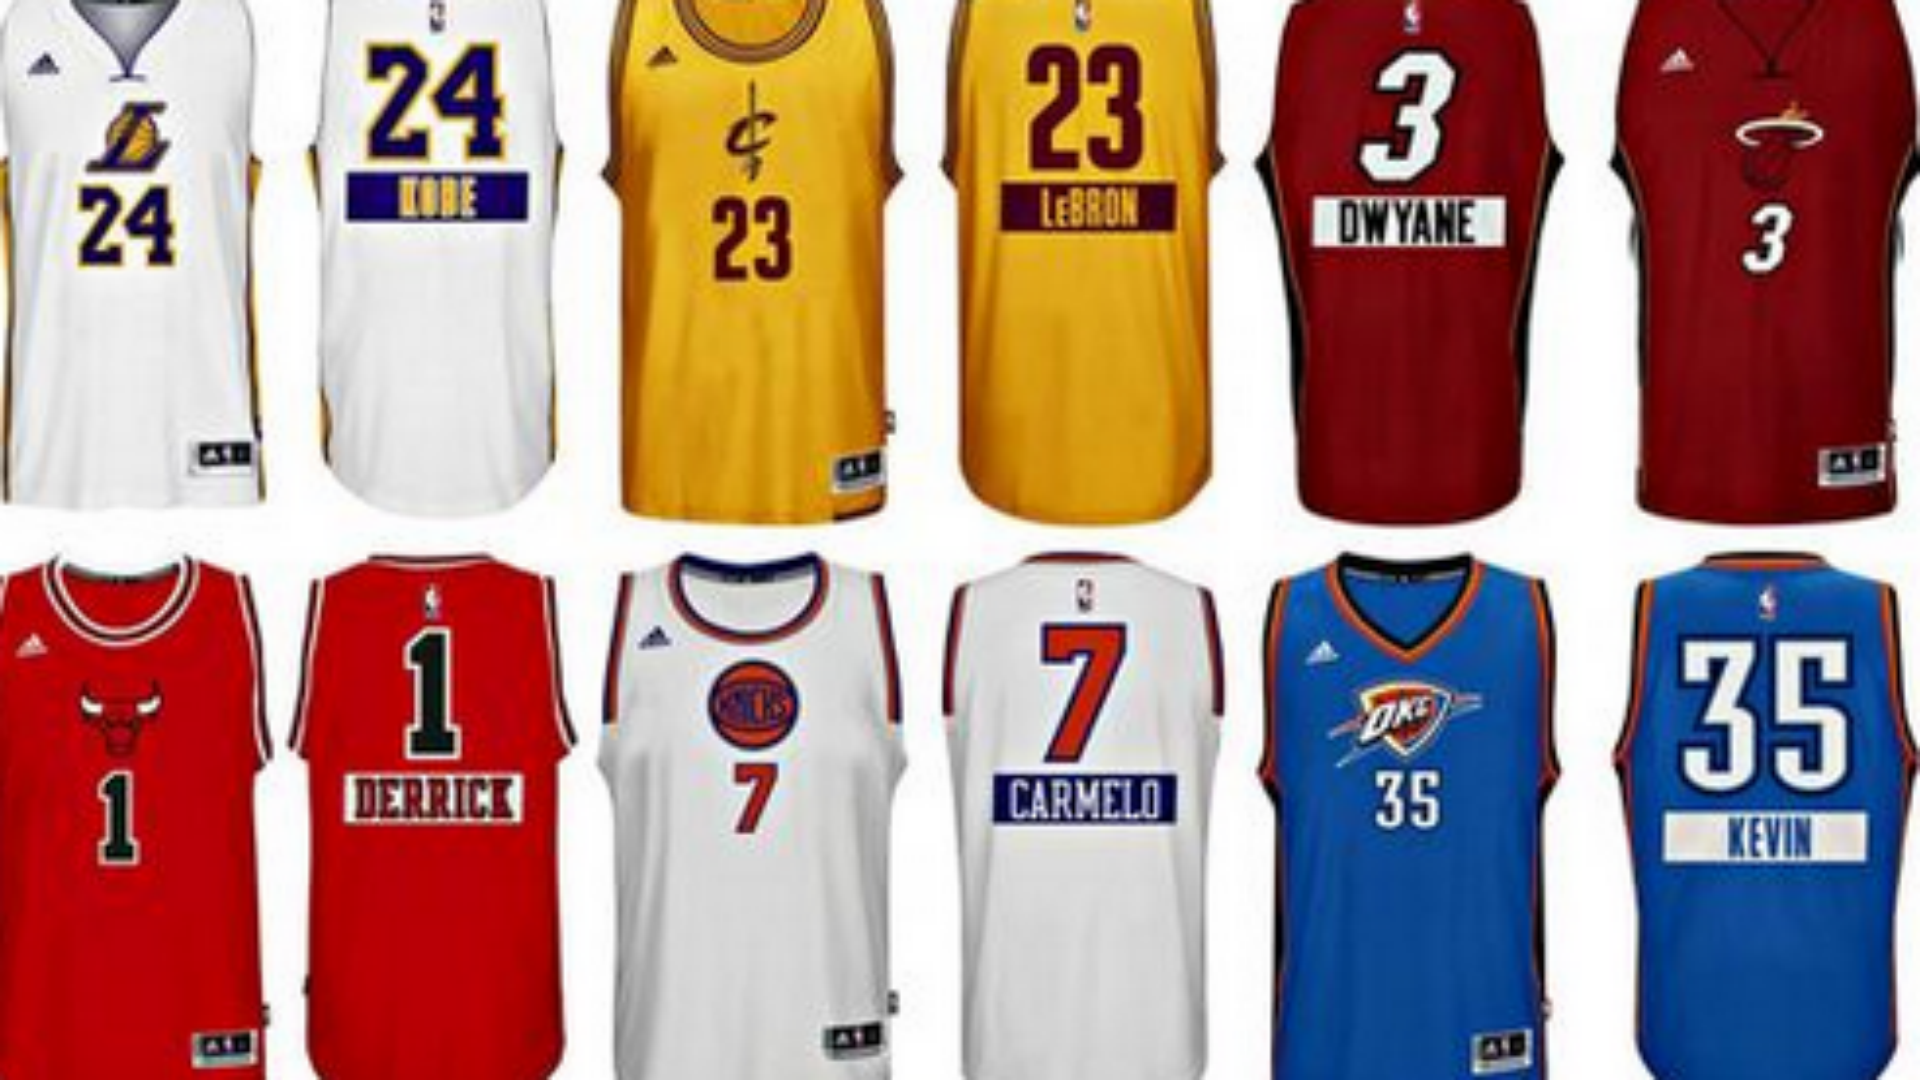 NBA Christmas jerseys have first names 